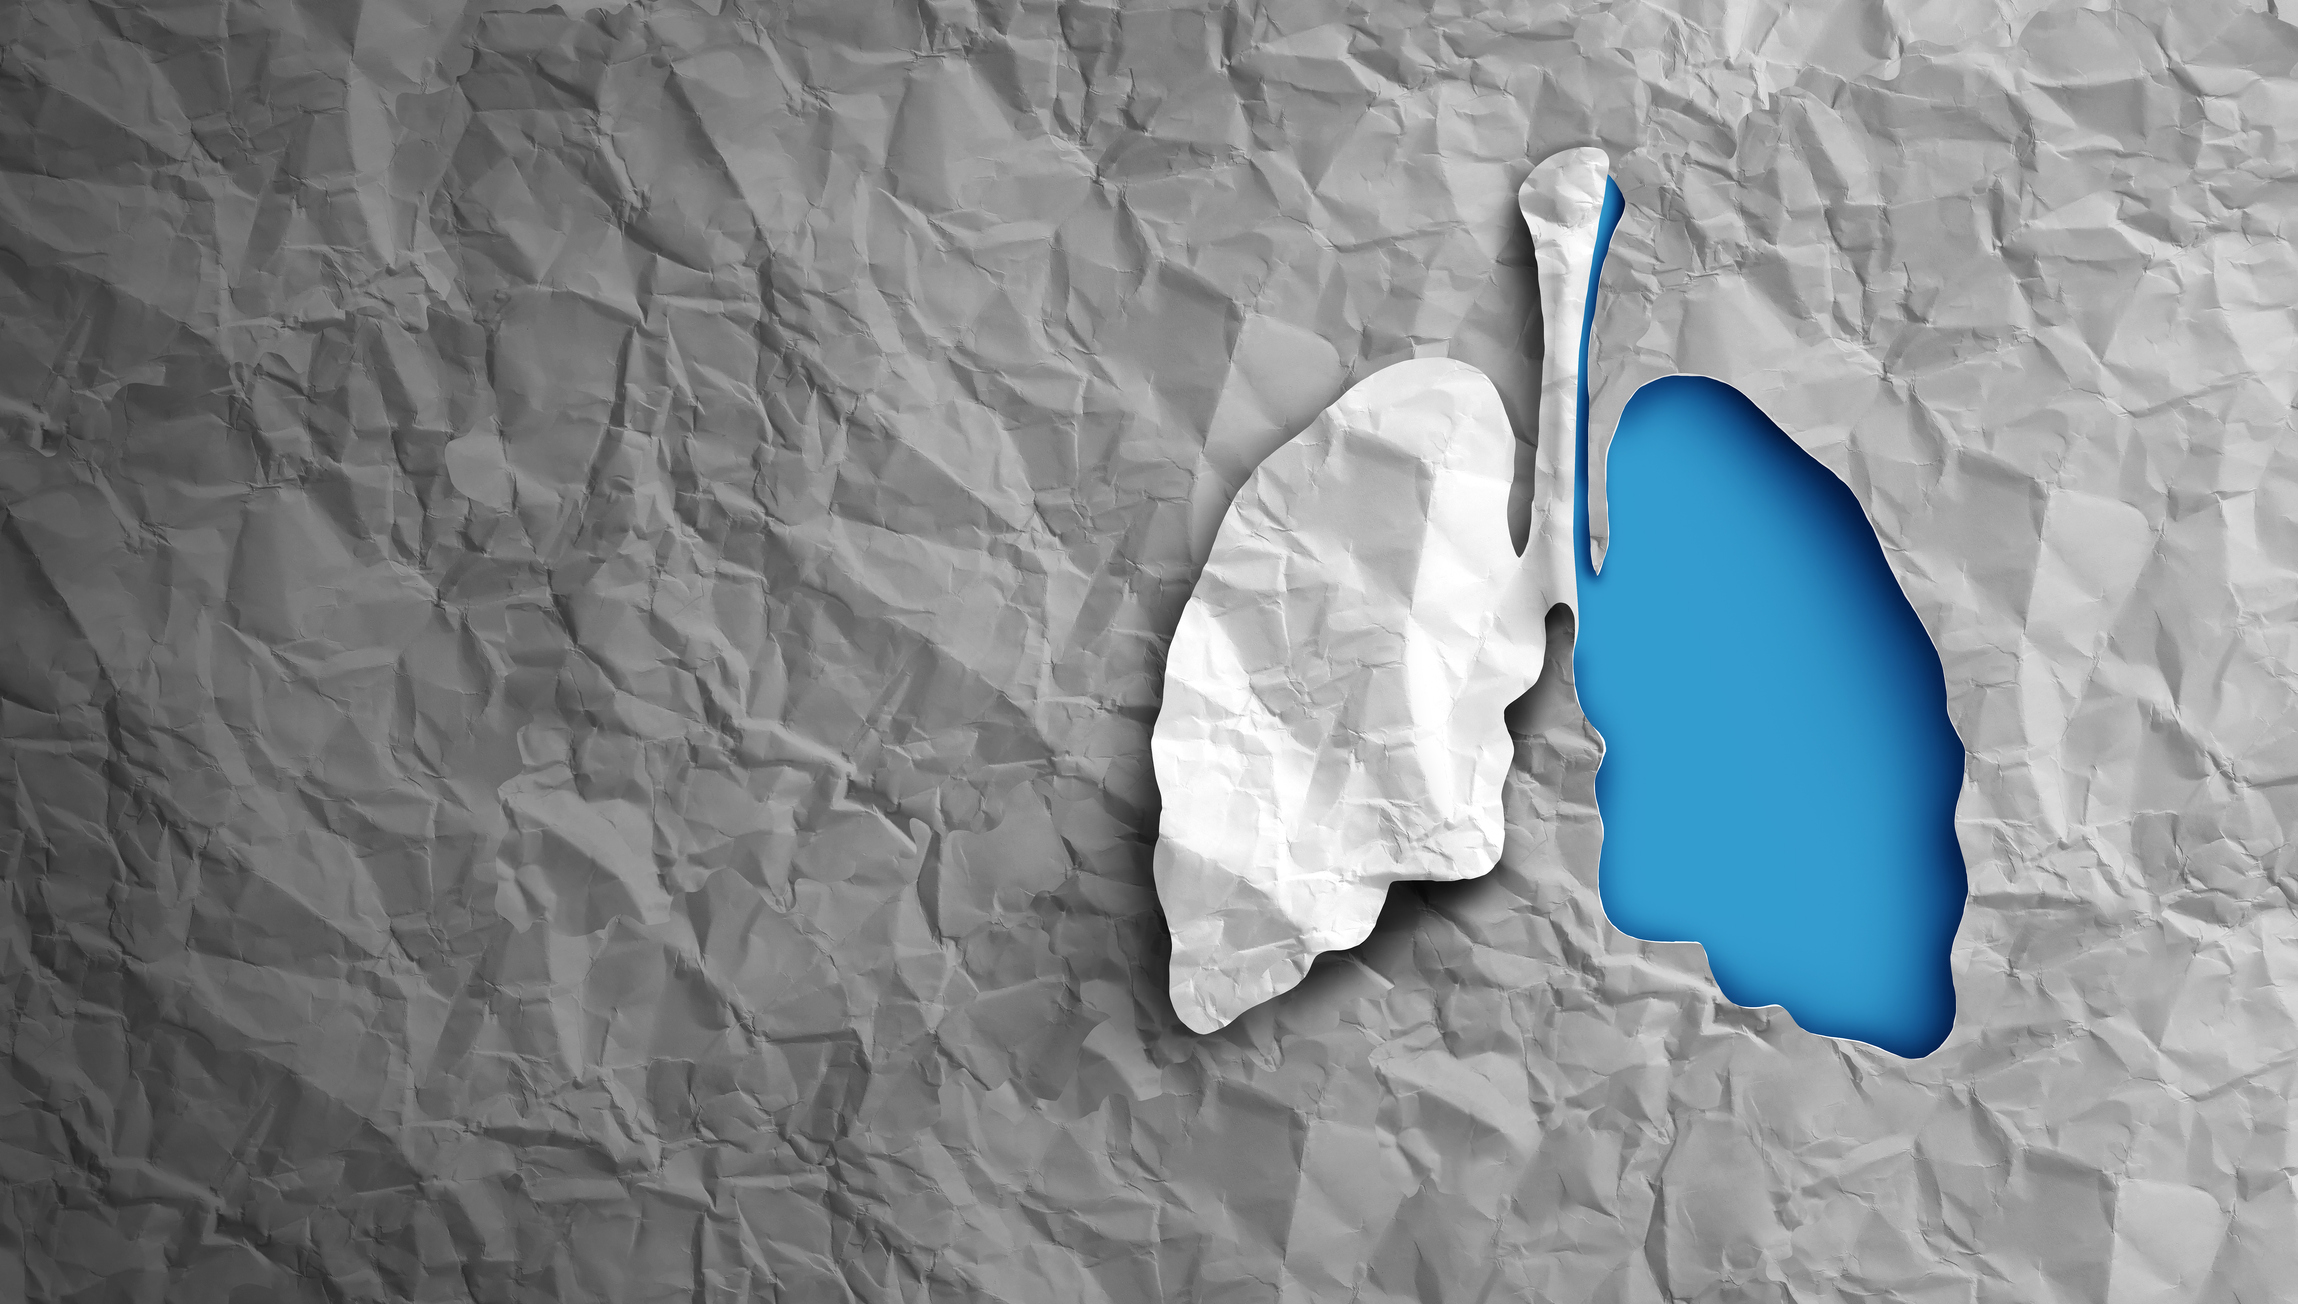 Lungs health and pulmonology as a respiratory medicine conept for pulmonary science and lung cancer or respiration disease and bronchi breathing or asthma symbol in a 3D illustration style.